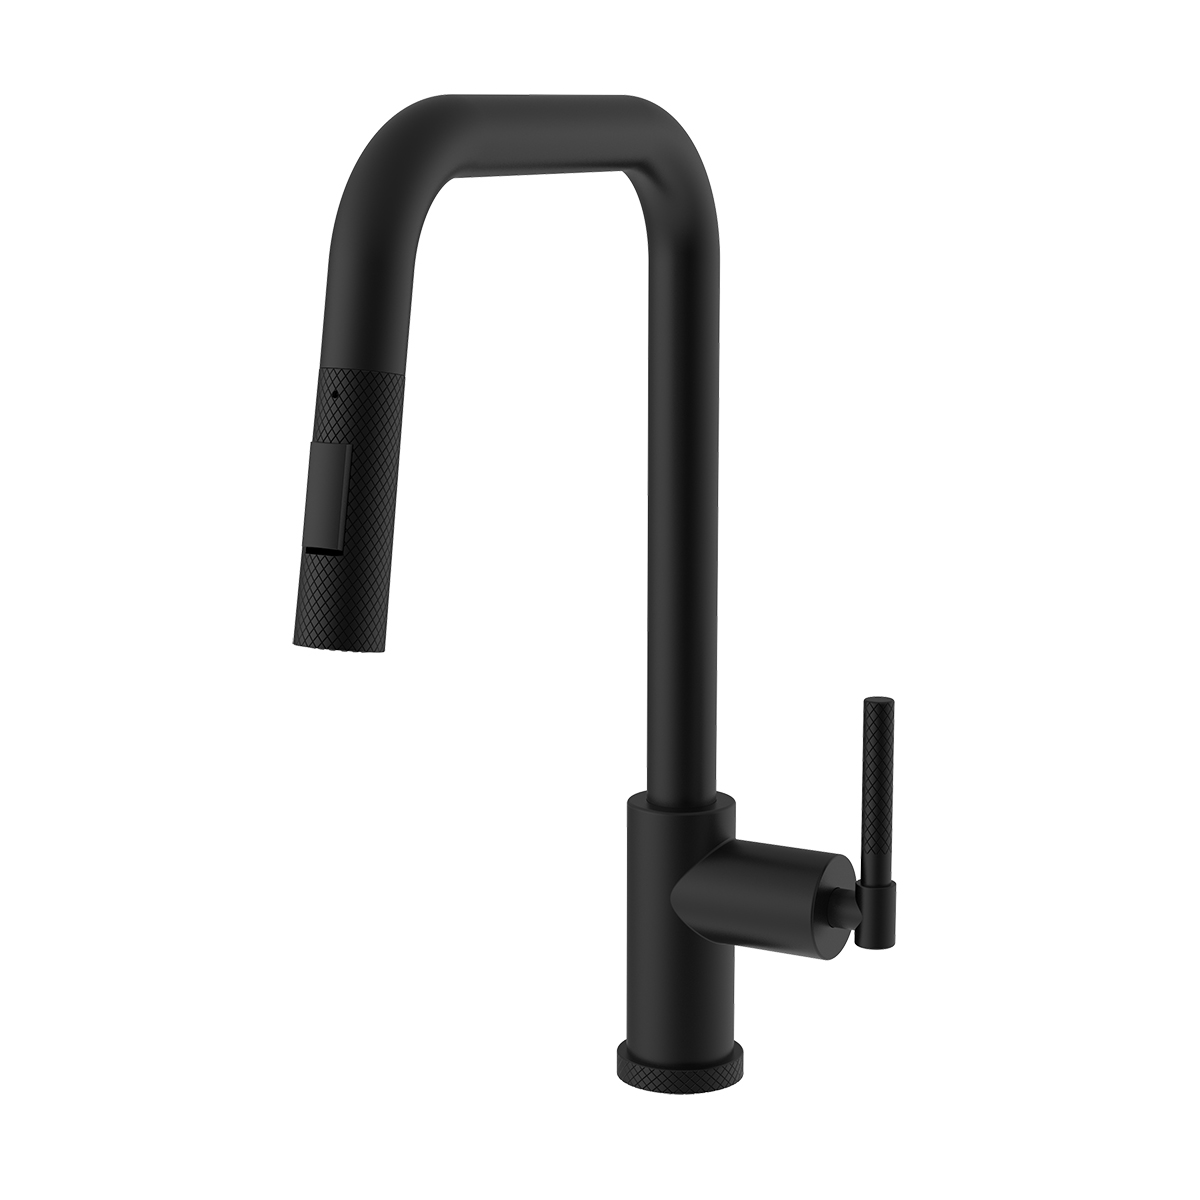 New Kitchen Sink Faucets With Pull Down Sprayer